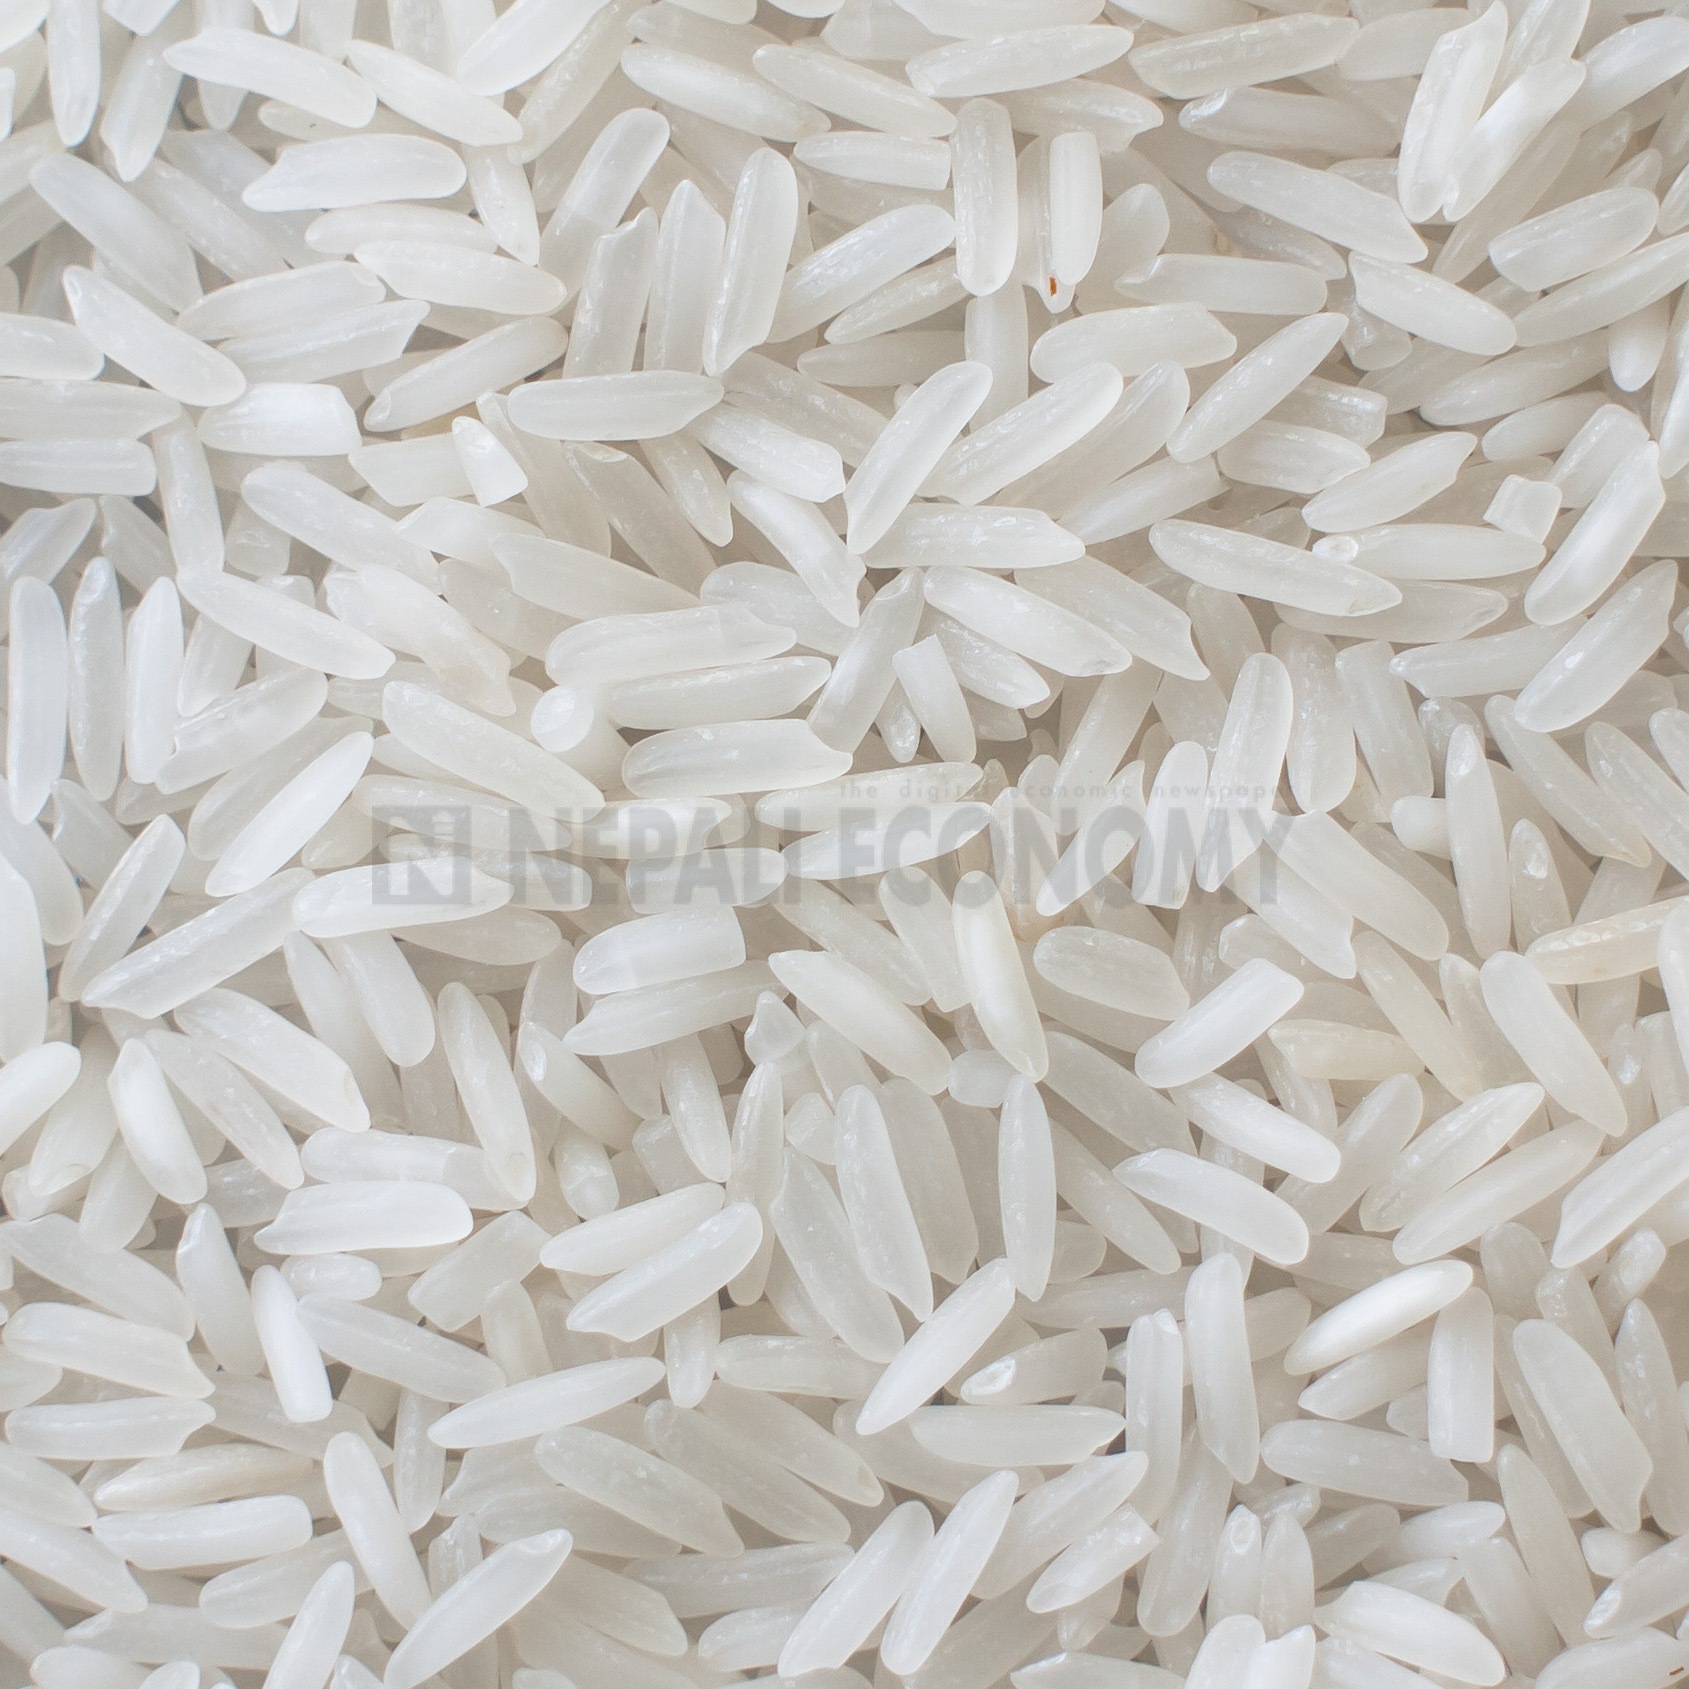 Consumer right activists want downward review of import tariff on rice